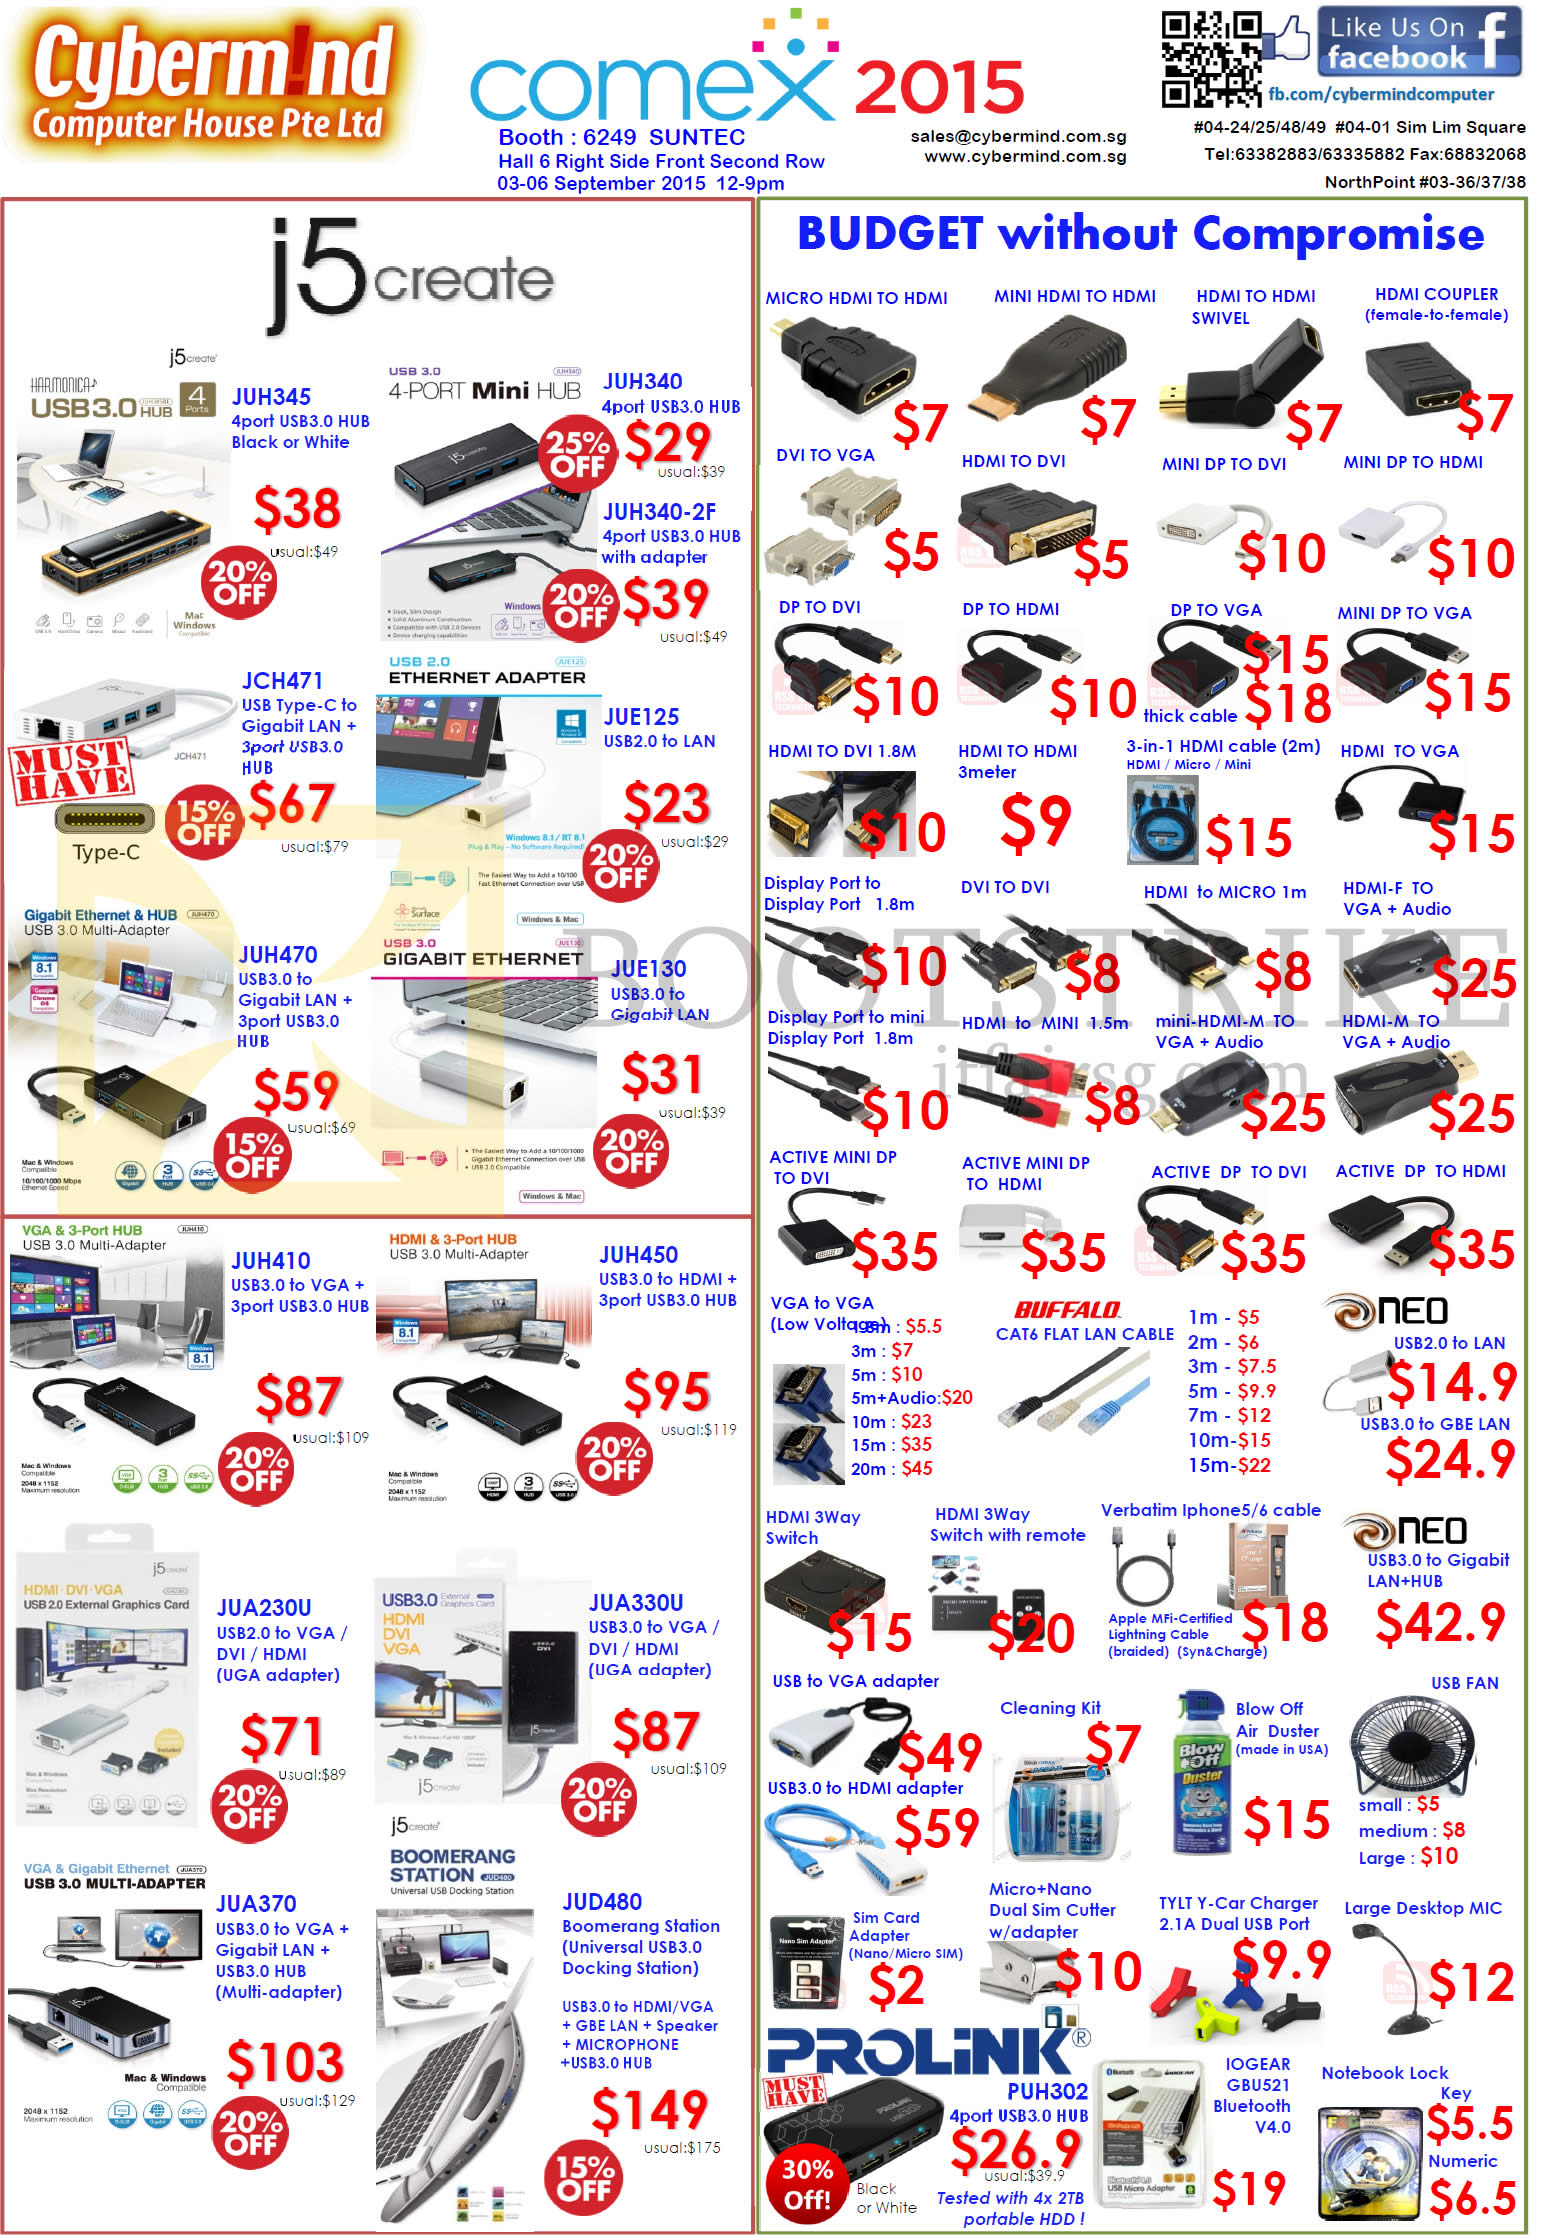 COMEX 2015 price list image brochure of Cybermind Accessories, USB Hubs, HDMI, DisplayPort, DVI, Cables, Cleaning Kit, USB Fan, VGA, Boomerang Station, LAN Cable